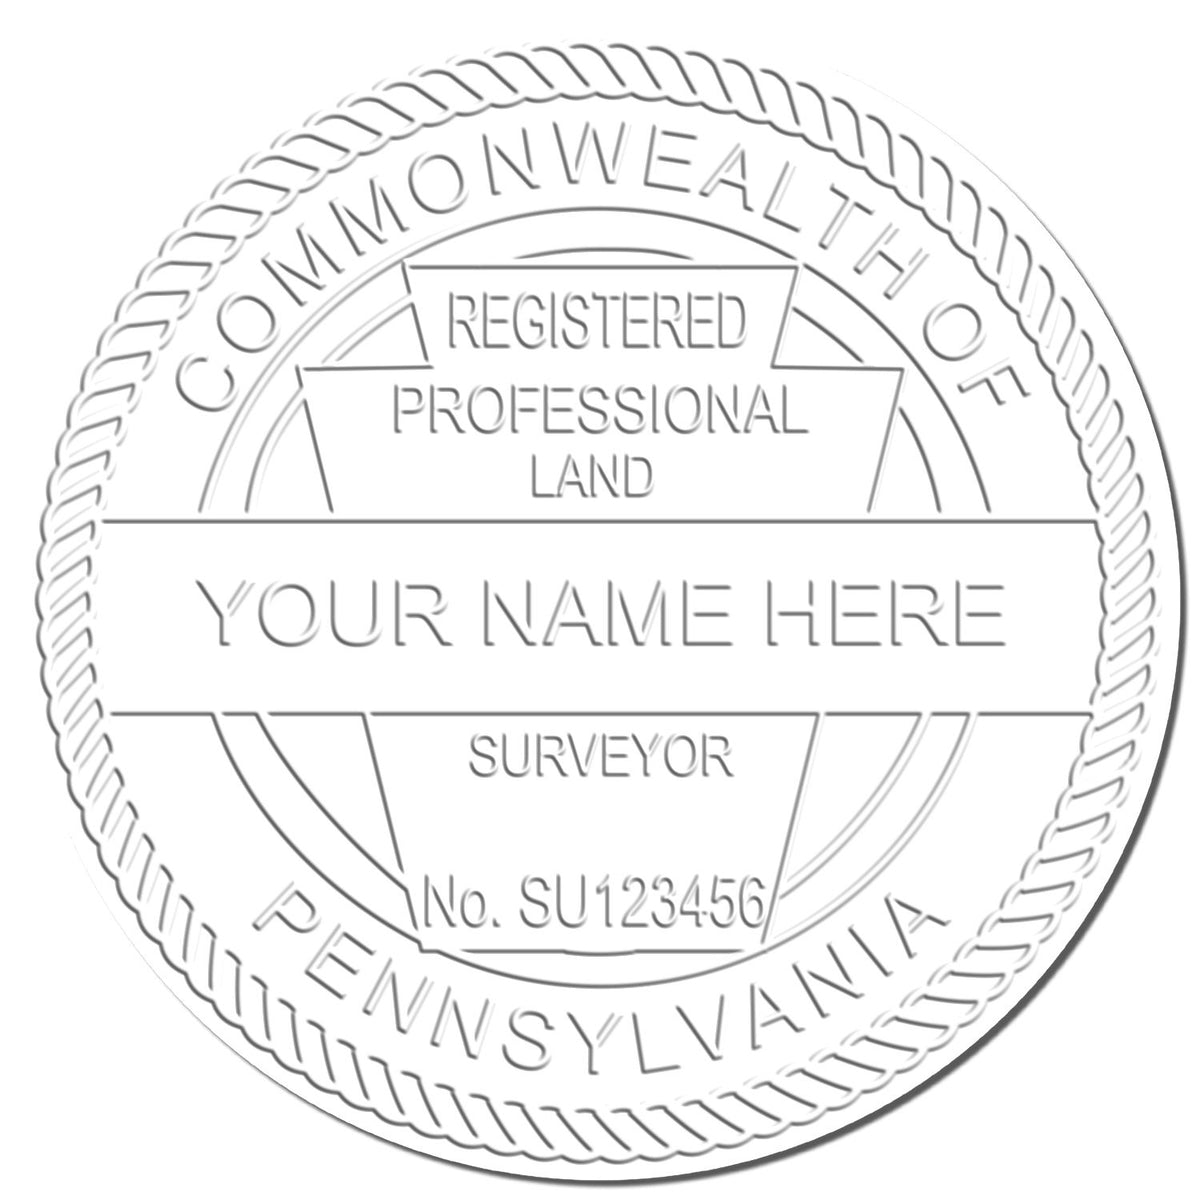 This paper is stamped with a sample imprint of the State of Pennsylvania Soft Land Surveyor Embossing Seal, signifying its quality and reliability.